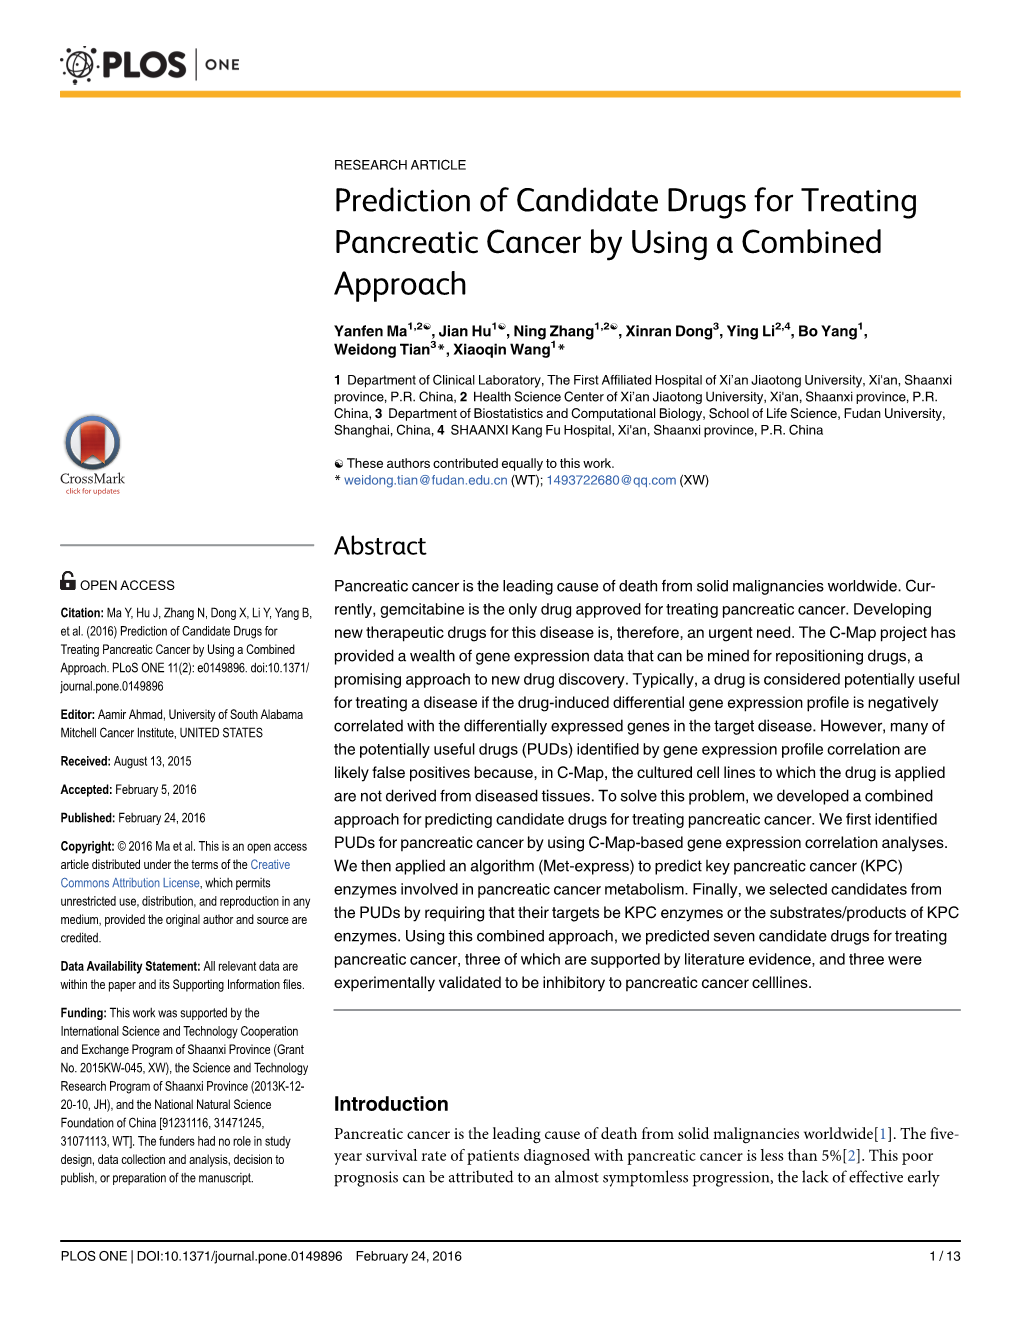 Prediction of Candidate Drugs for Treating Pancreatic Cancer by Using a Combined Approach